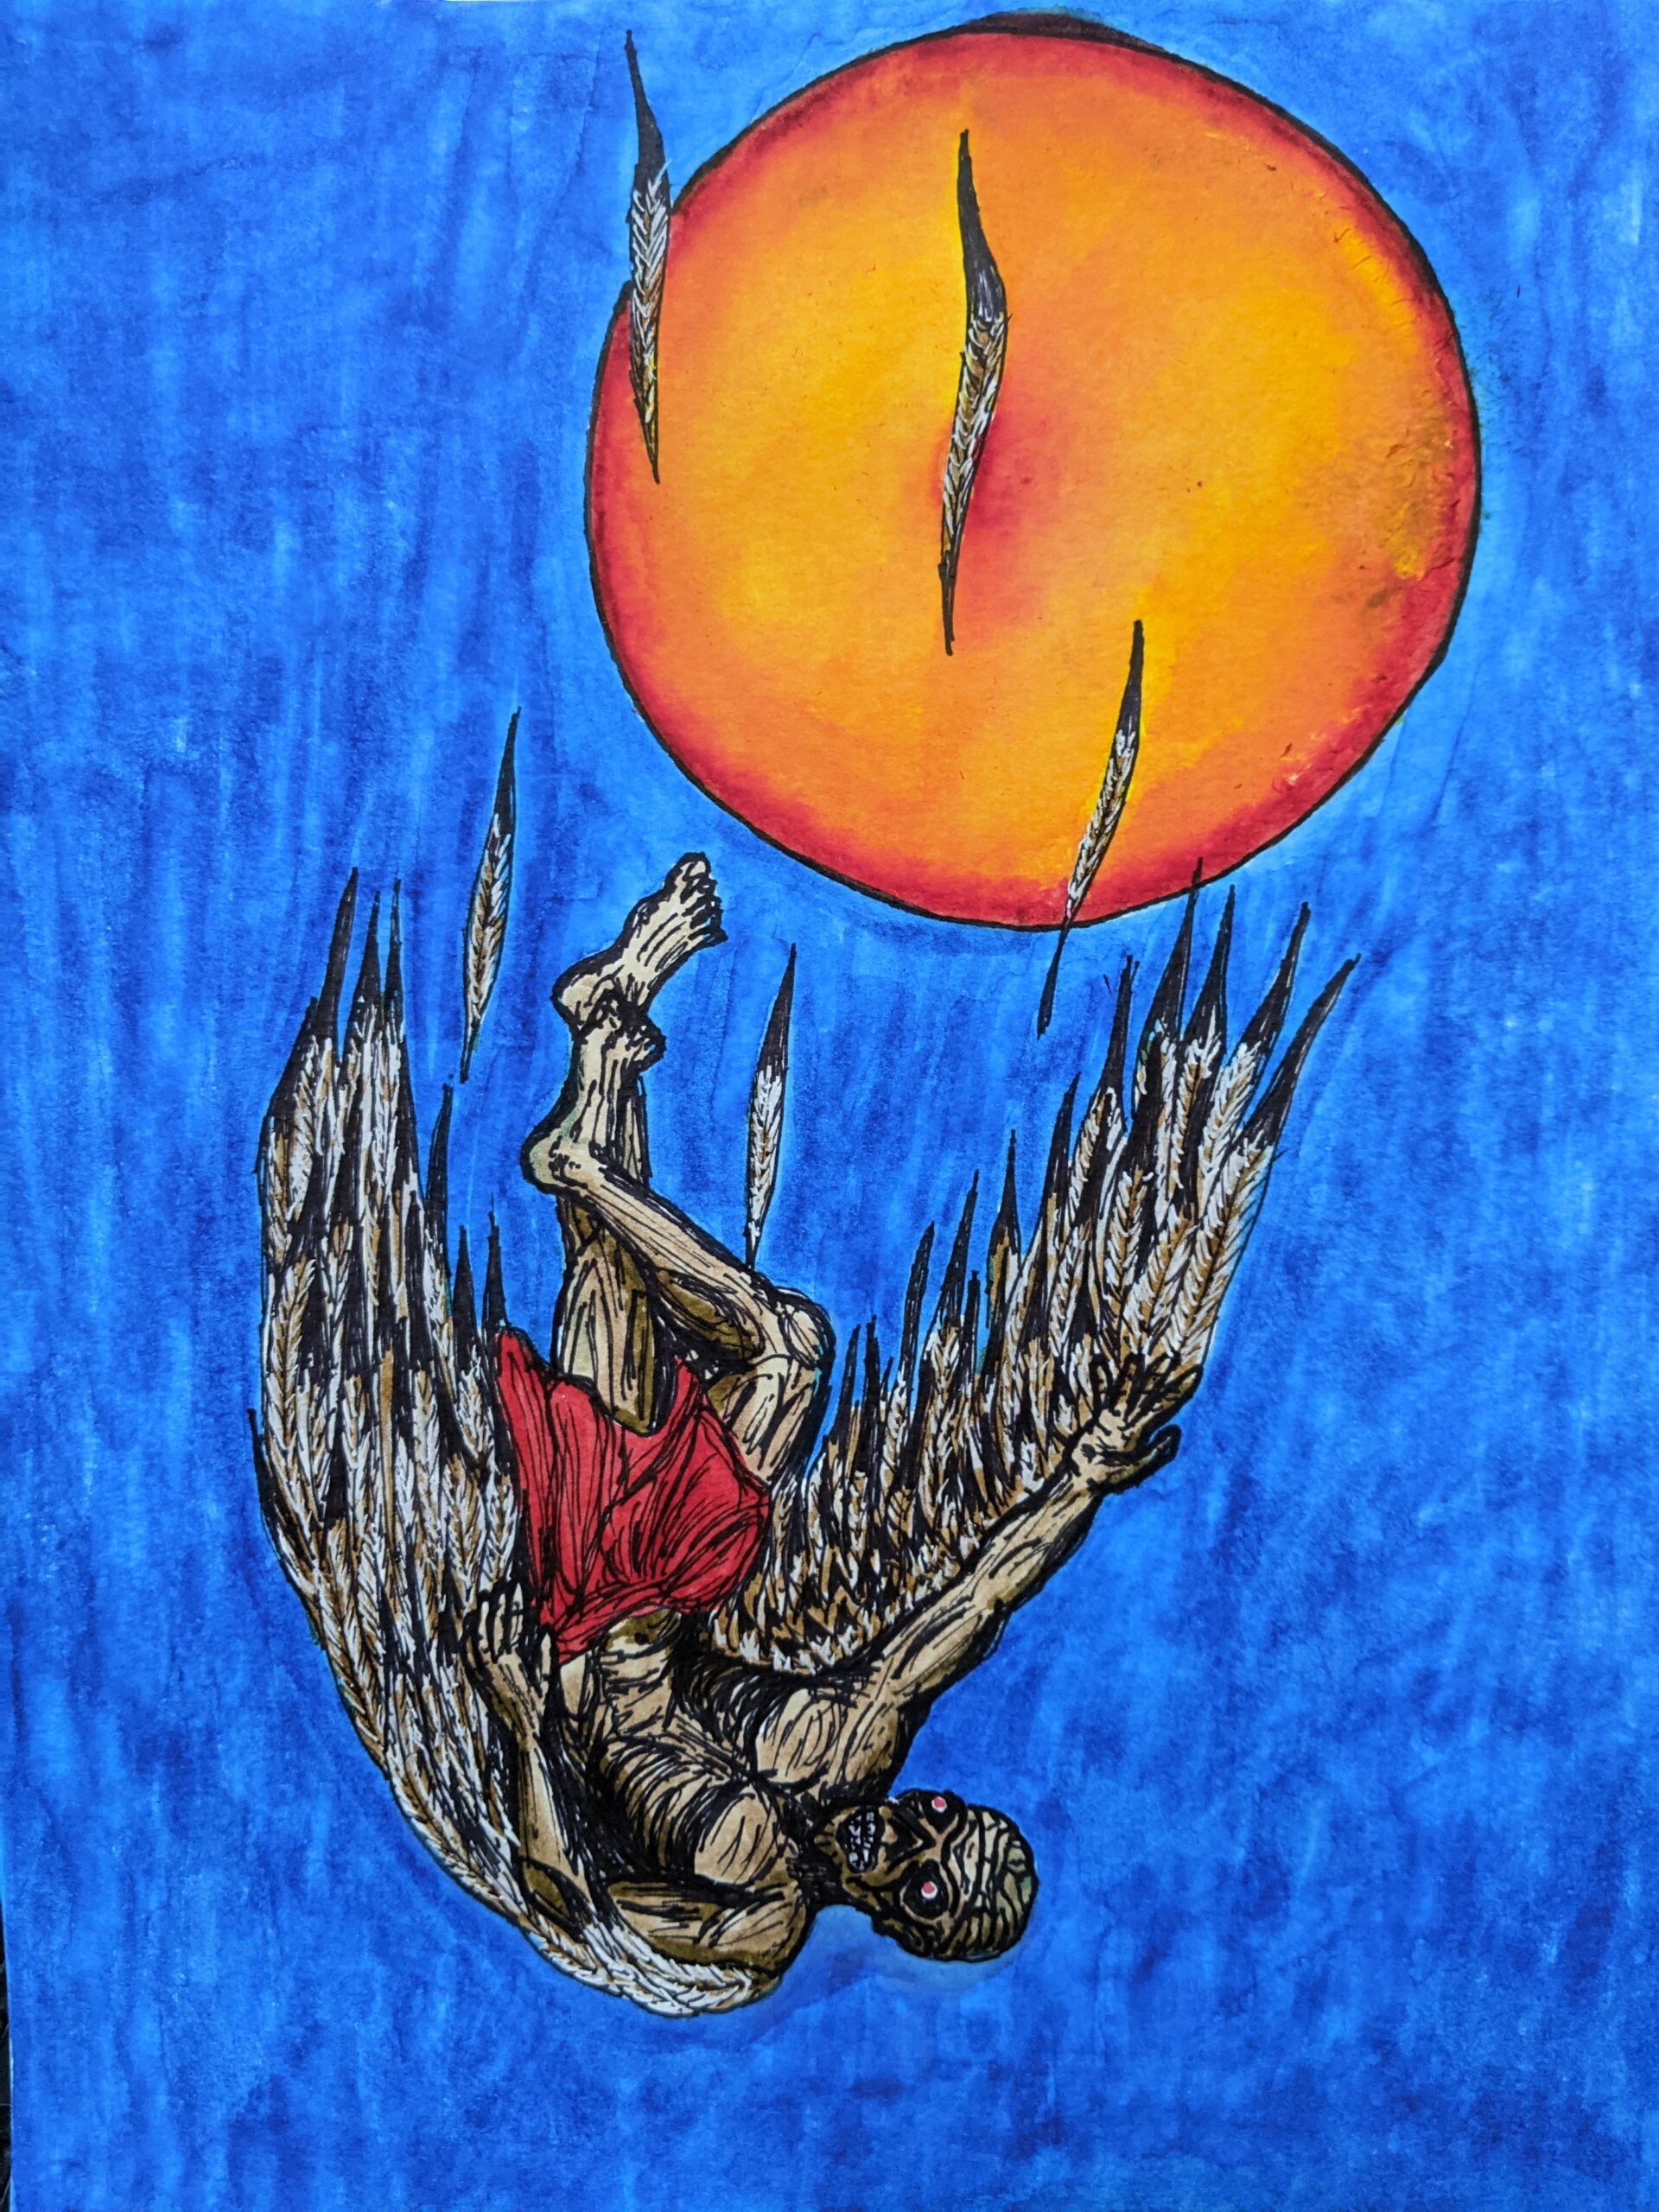 The Fall of Eddie 9x12 brush pen drawing of Iron Maidens Eddie as Icarus falling away from the sun from the Flight of Icarus. Bright rich blue sky and yellowish orange red sun